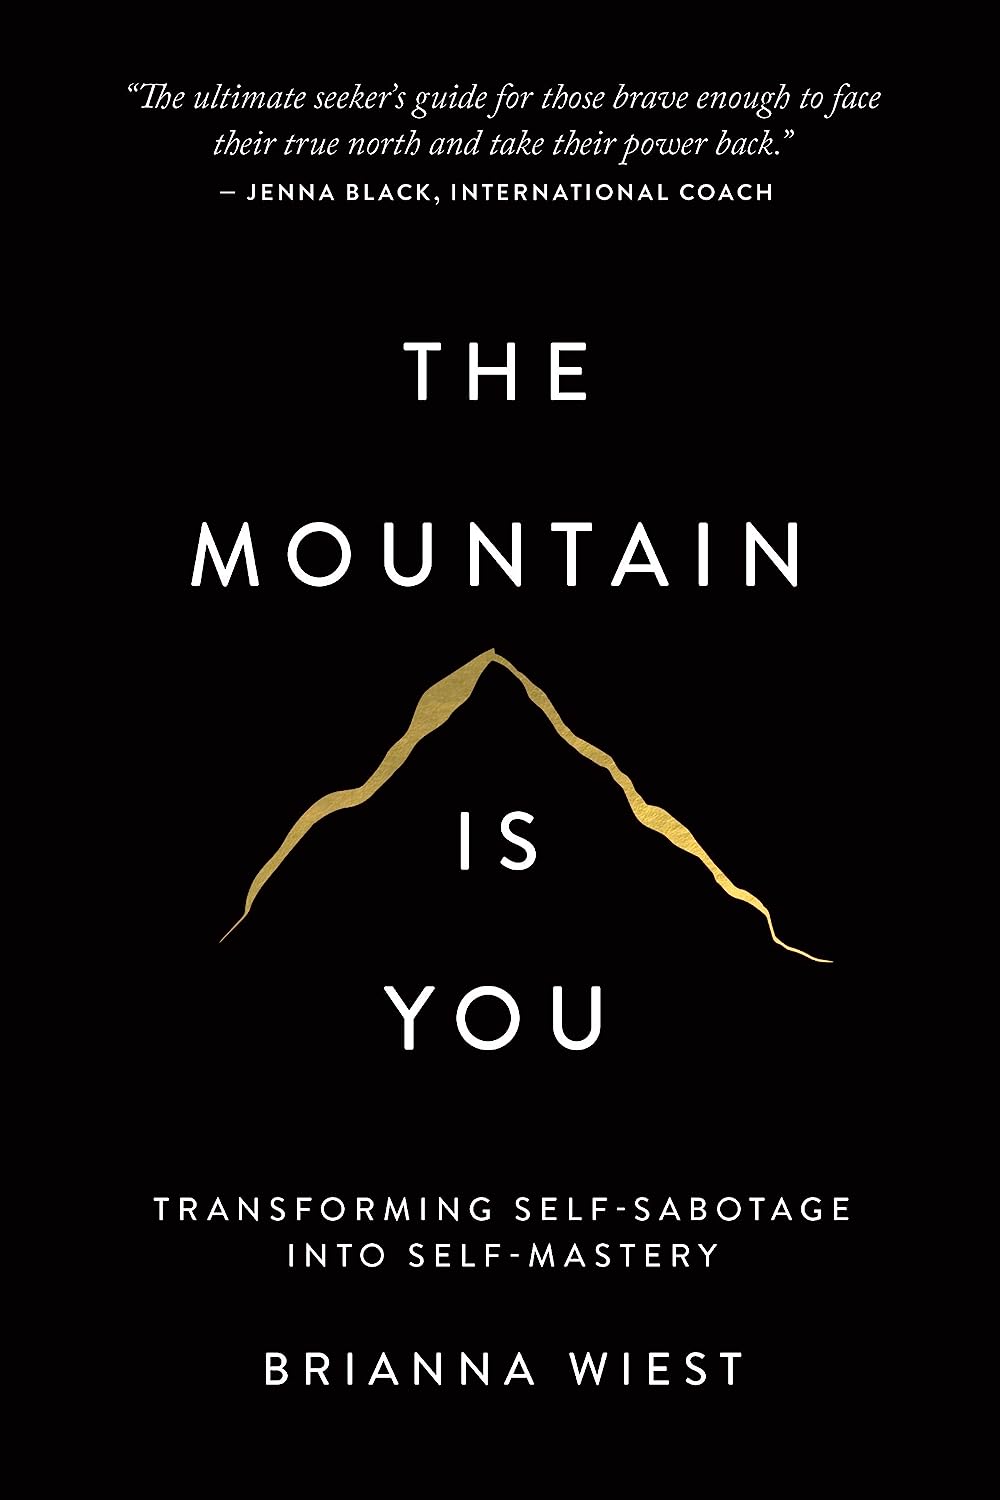 The Mountain Is You Book Recommended By Briana Lefman at Hamsa Healing Space - Book